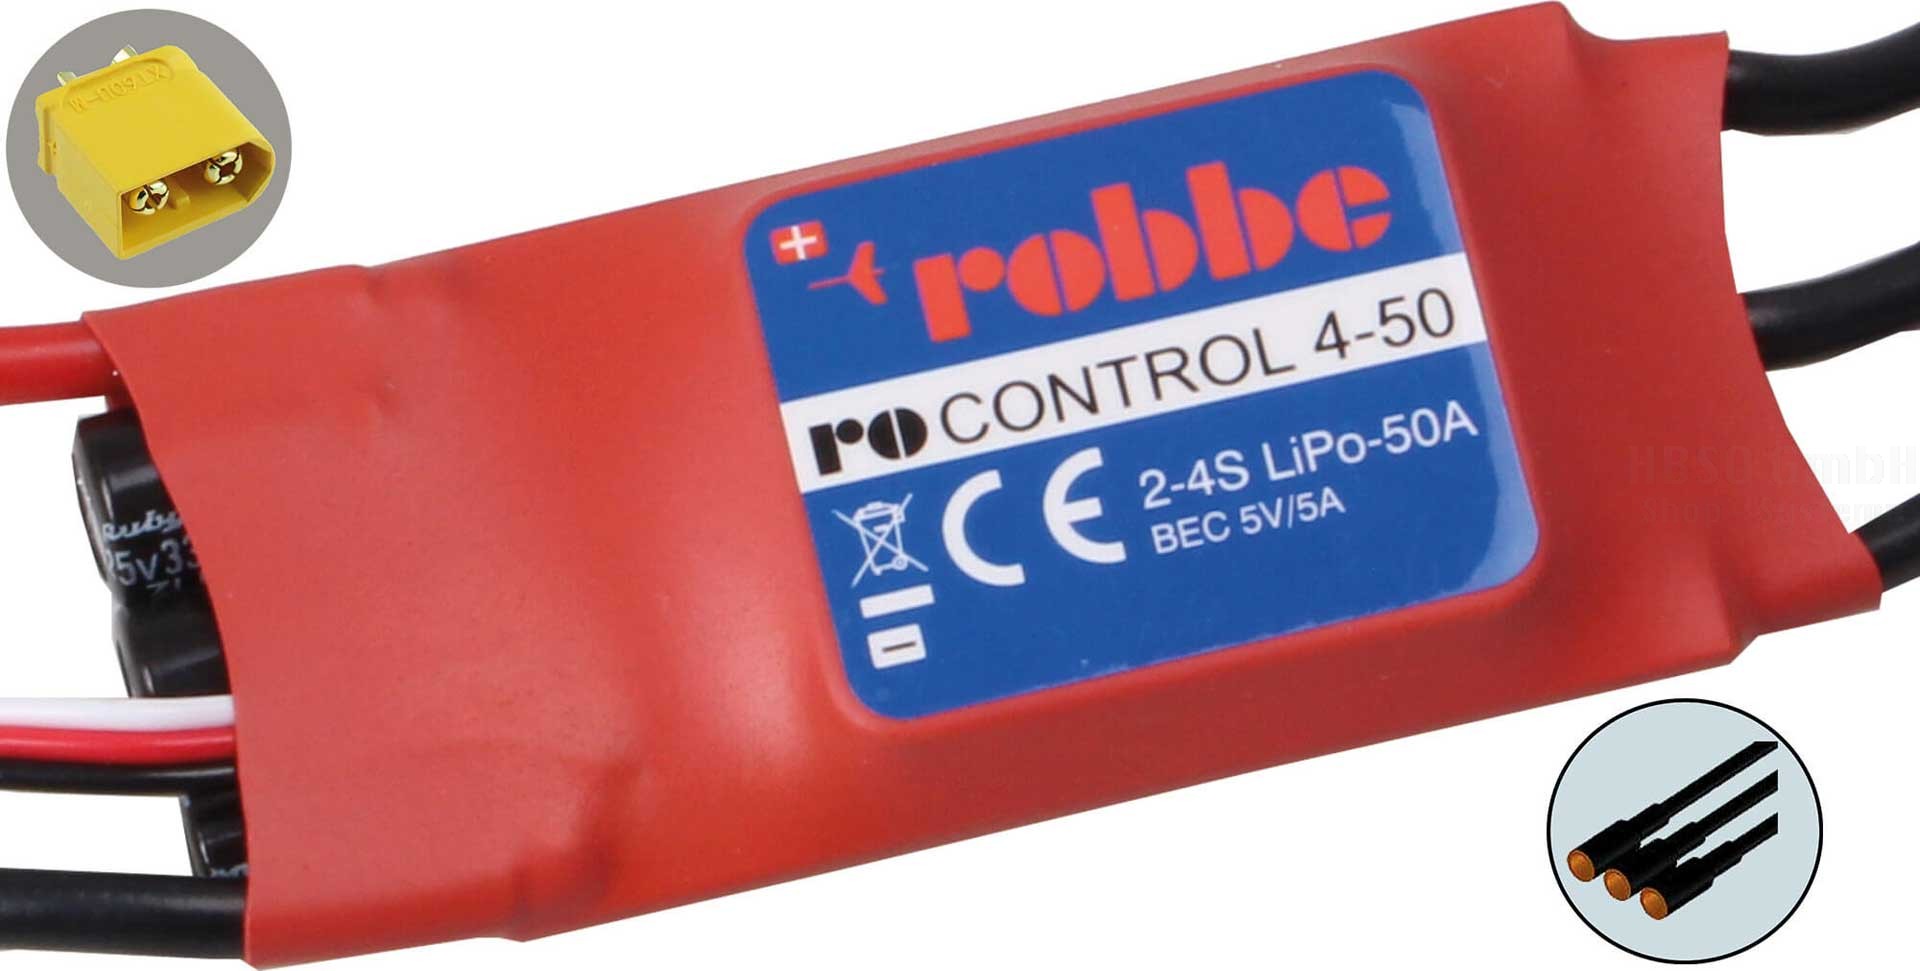 Robbe Modellsport RO-CONTROL 4-50 2-4S -50(70)A 5V/5A SWITCH BEC